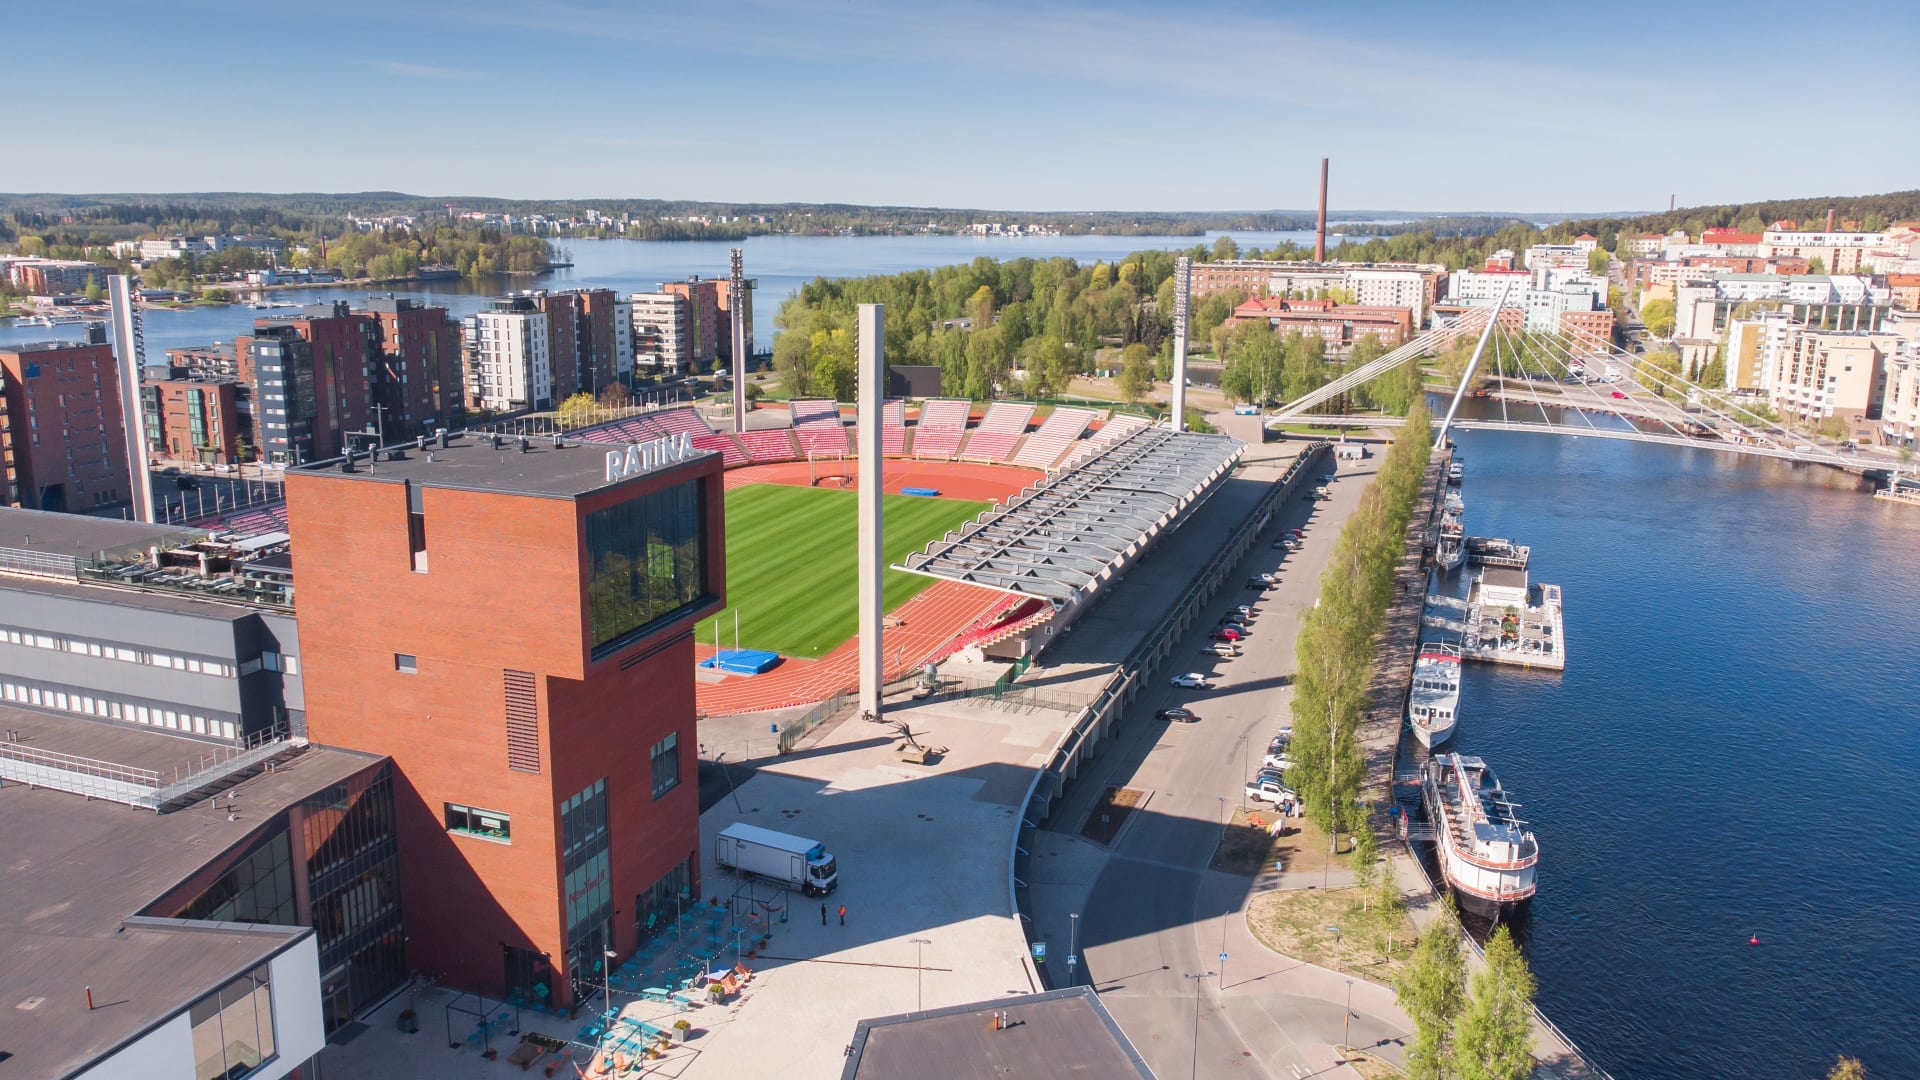 Ratina stadium and area from above.